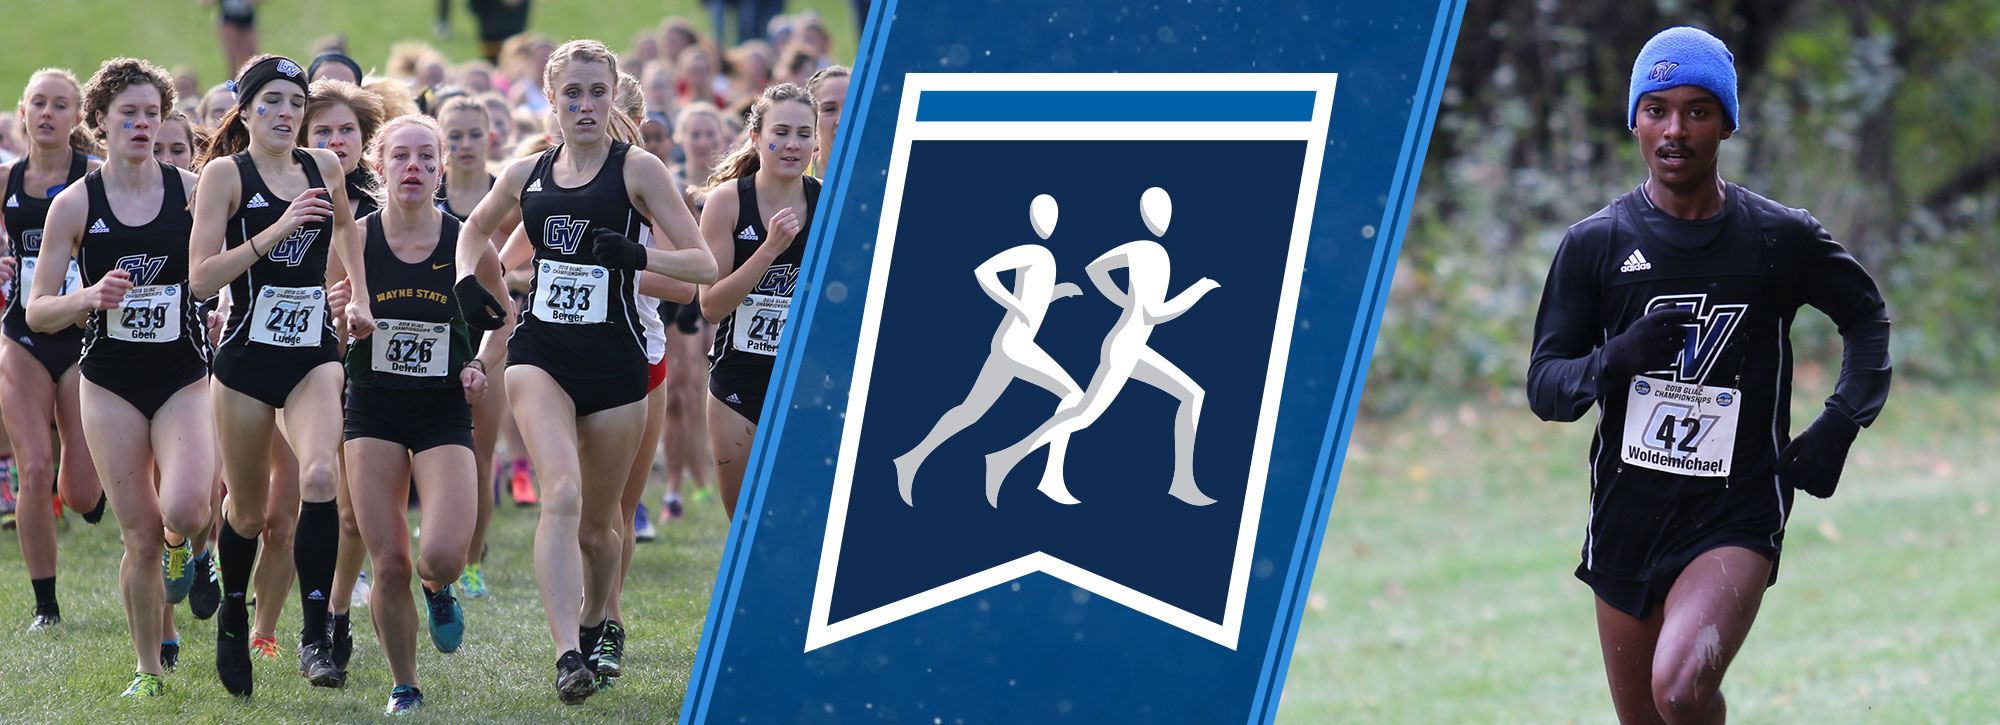 Grand Valley State Sweeps Cross Country Regional Team Titles; GLIAC Runners Dominate